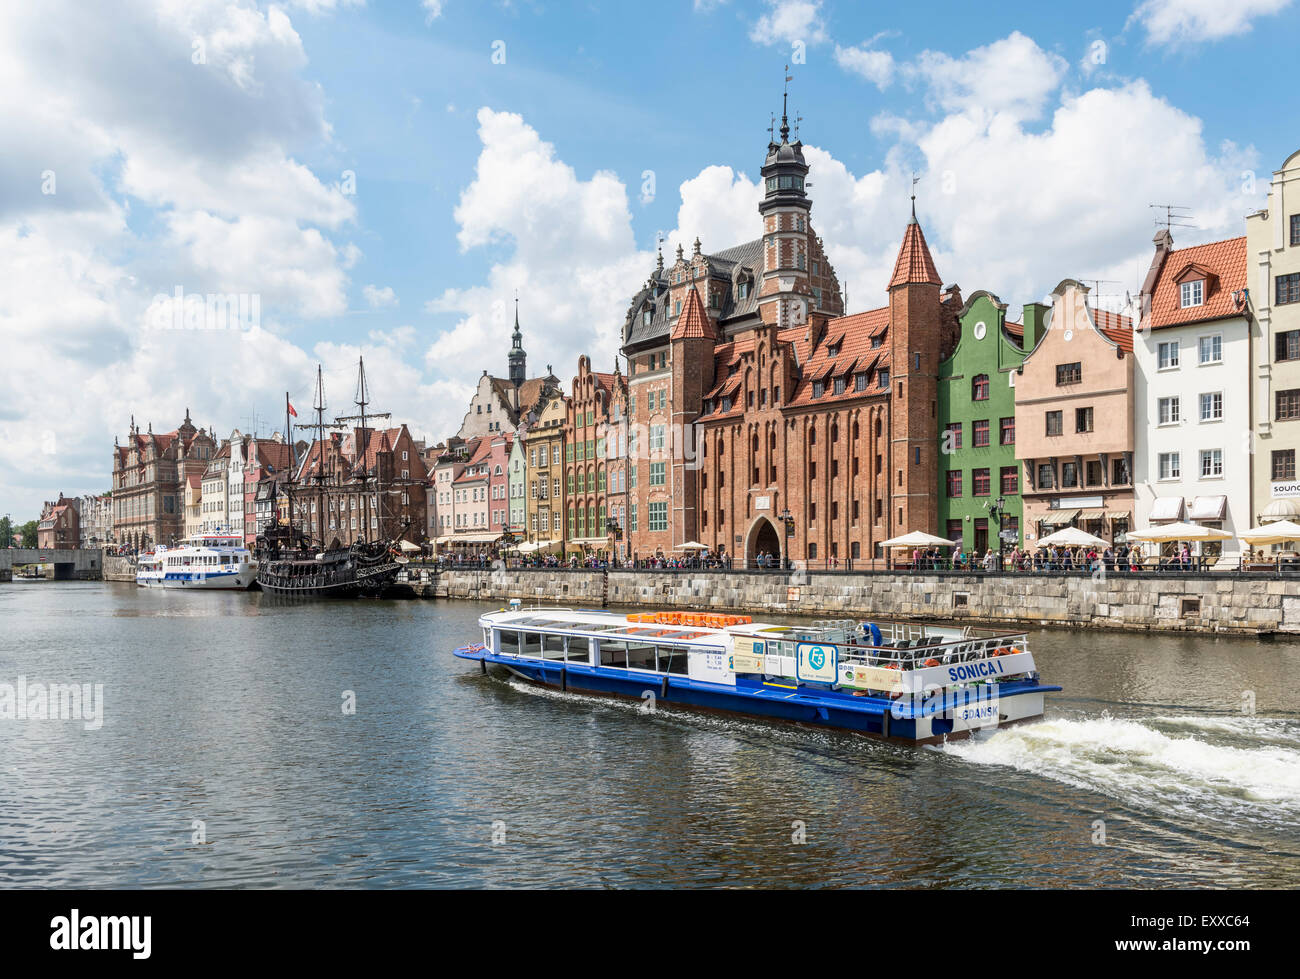 Tourist tour boat in Gdansk, Poland, Europe on the banks of the River  Motlawa Stock Photo - Alamy